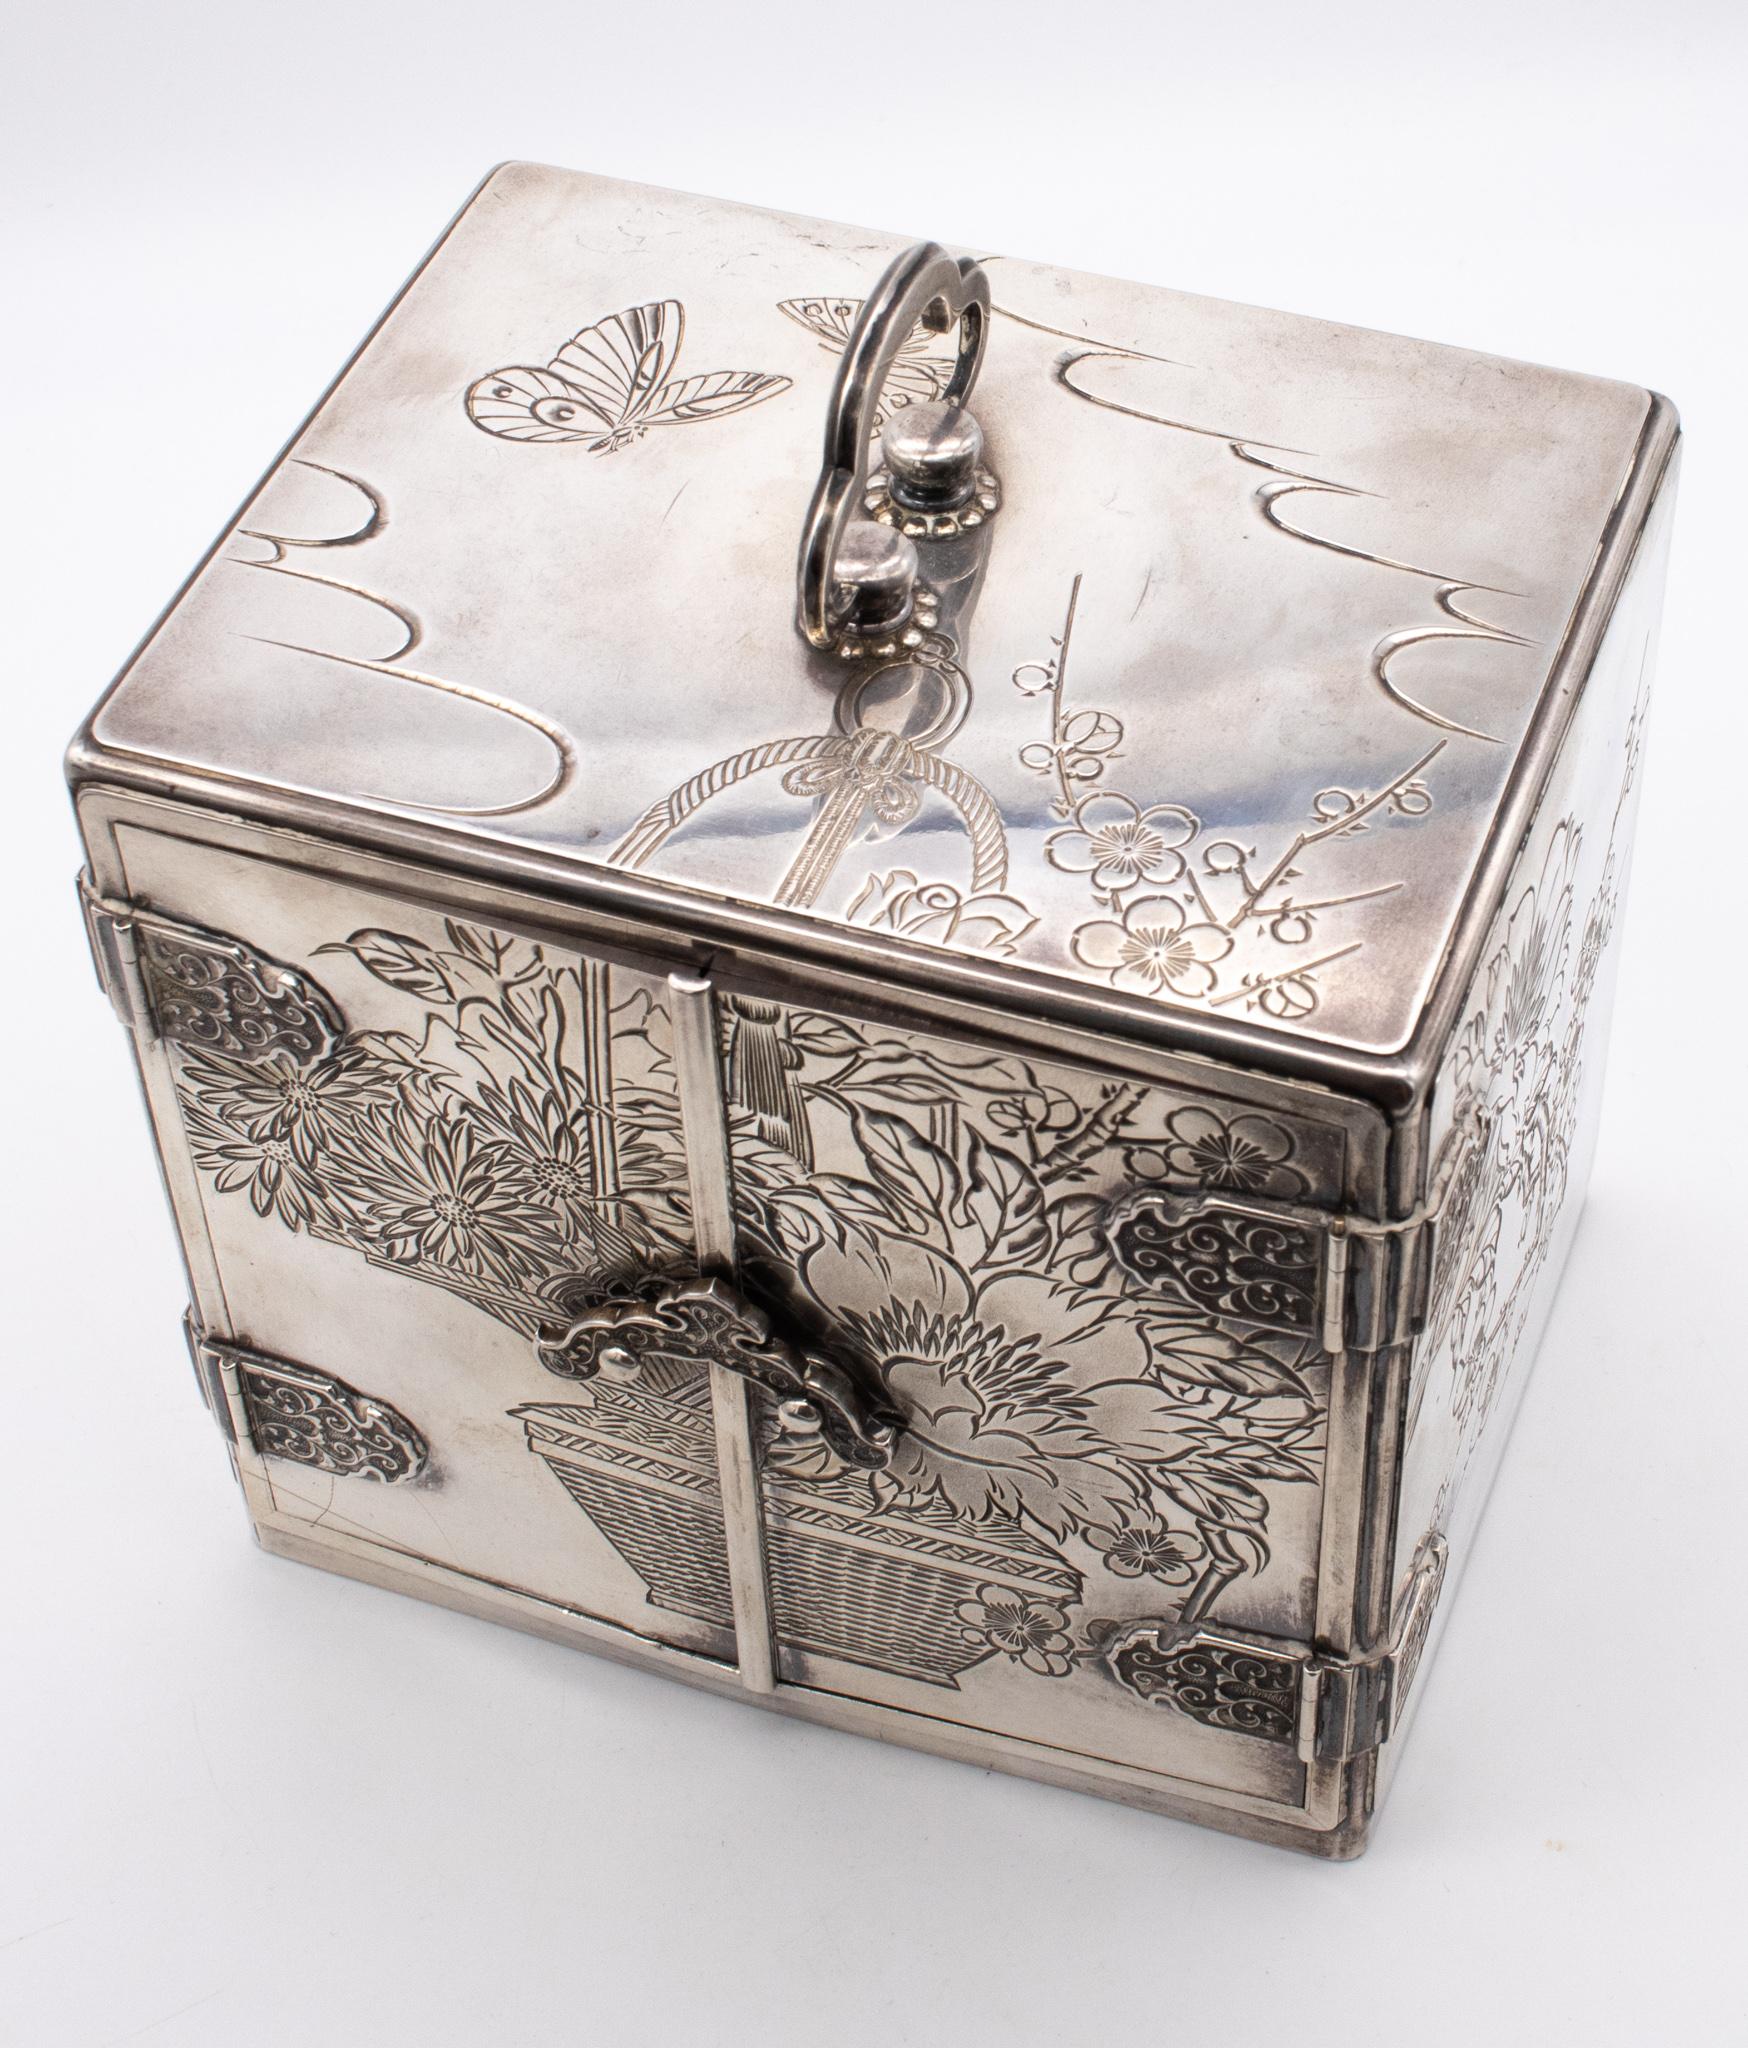 Japan Meiji Period 1868-1912 Jewel Box with Compartments Drawers Sterling Silver 1